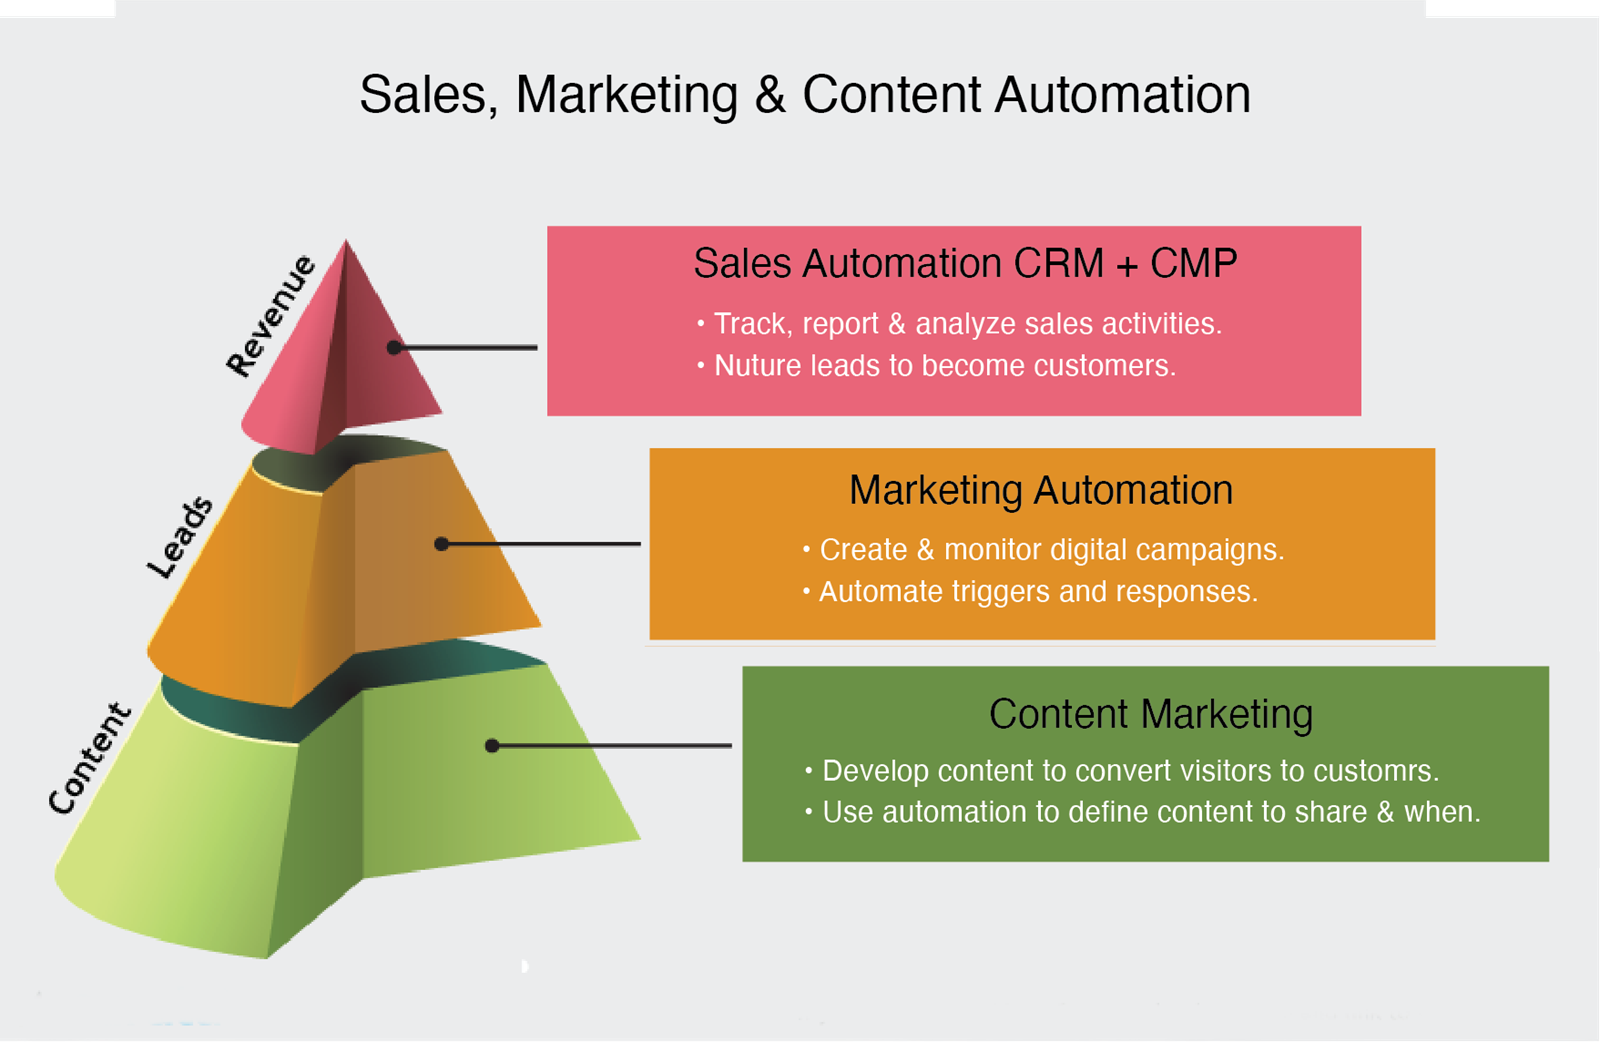 sales and marketing content automation image